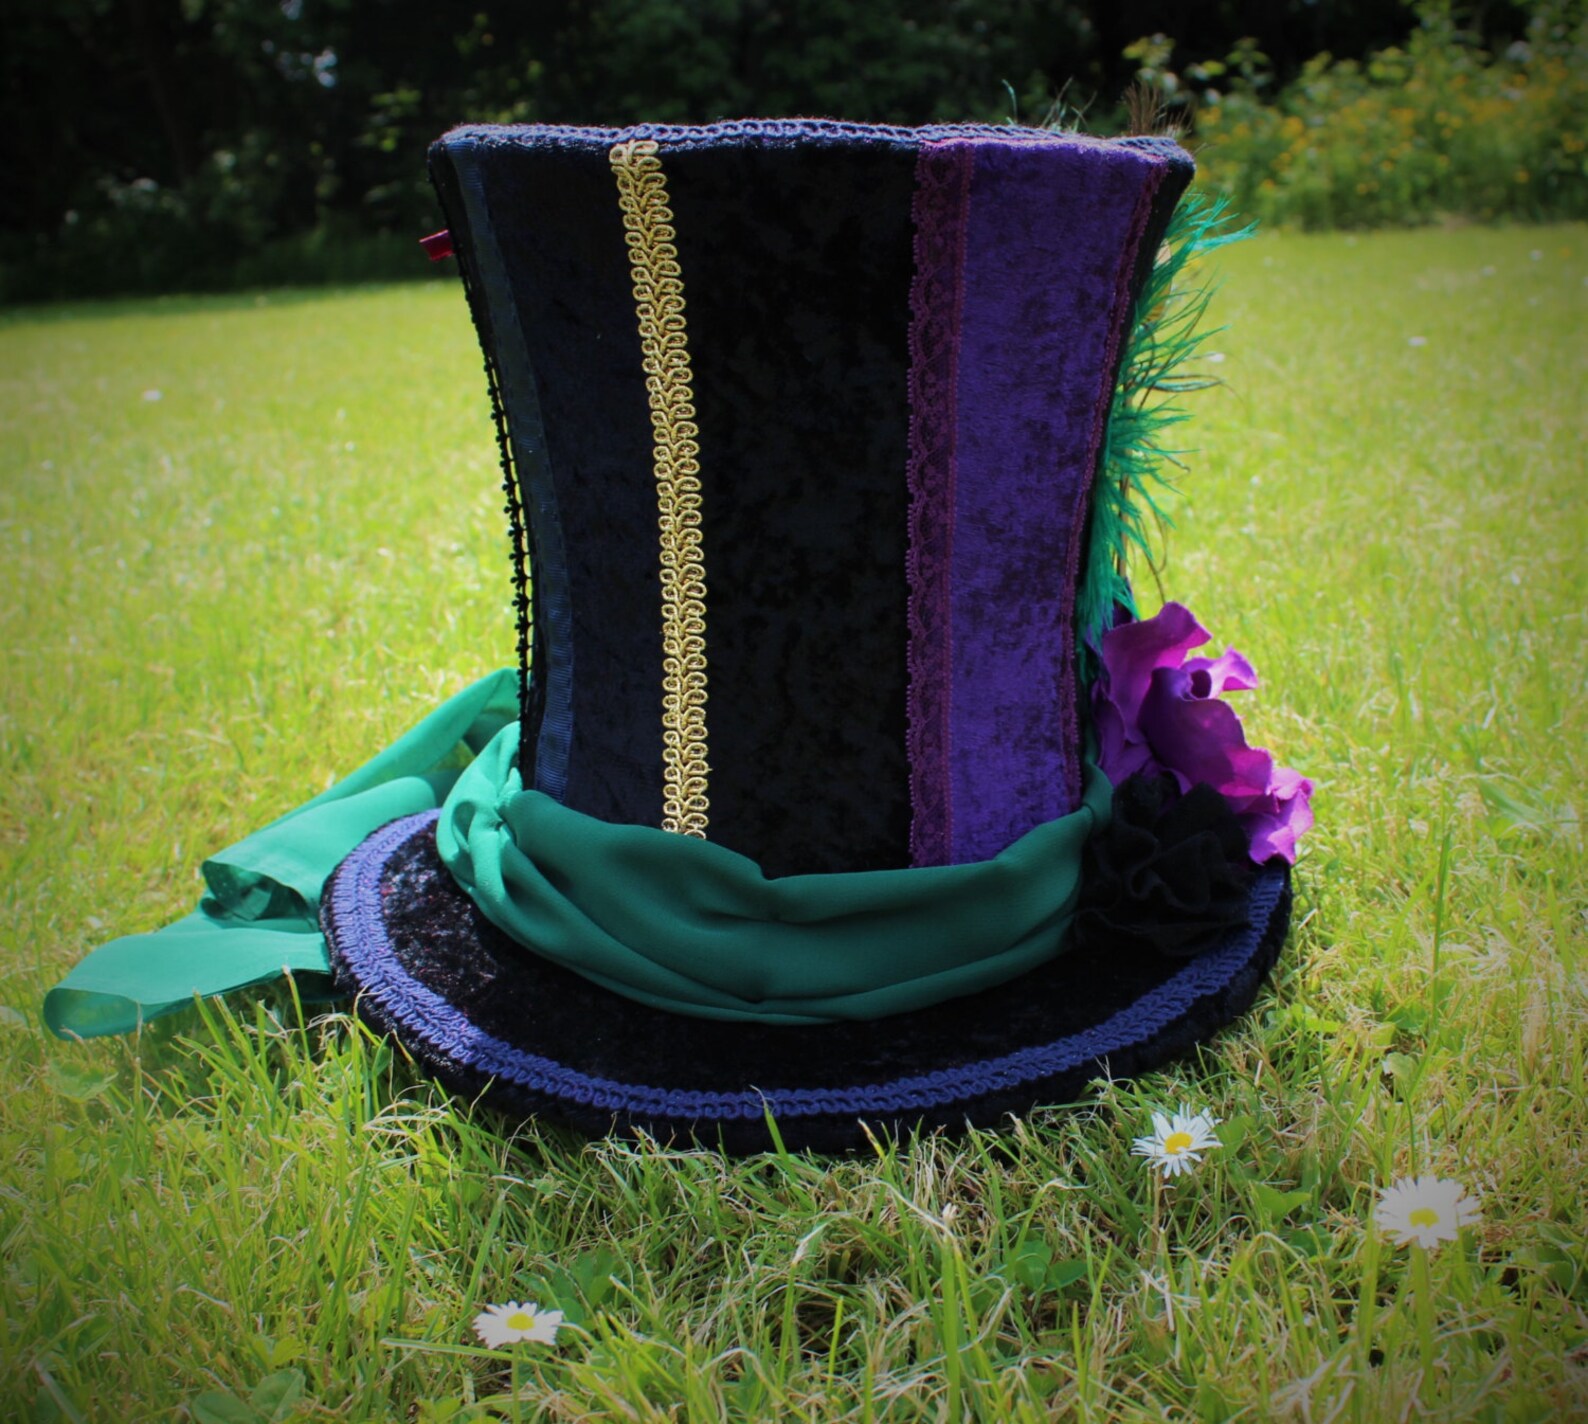 Hand Made Mad Hatter Top Hat. Full Size Top Hat. Bespoke. Made | Etsy